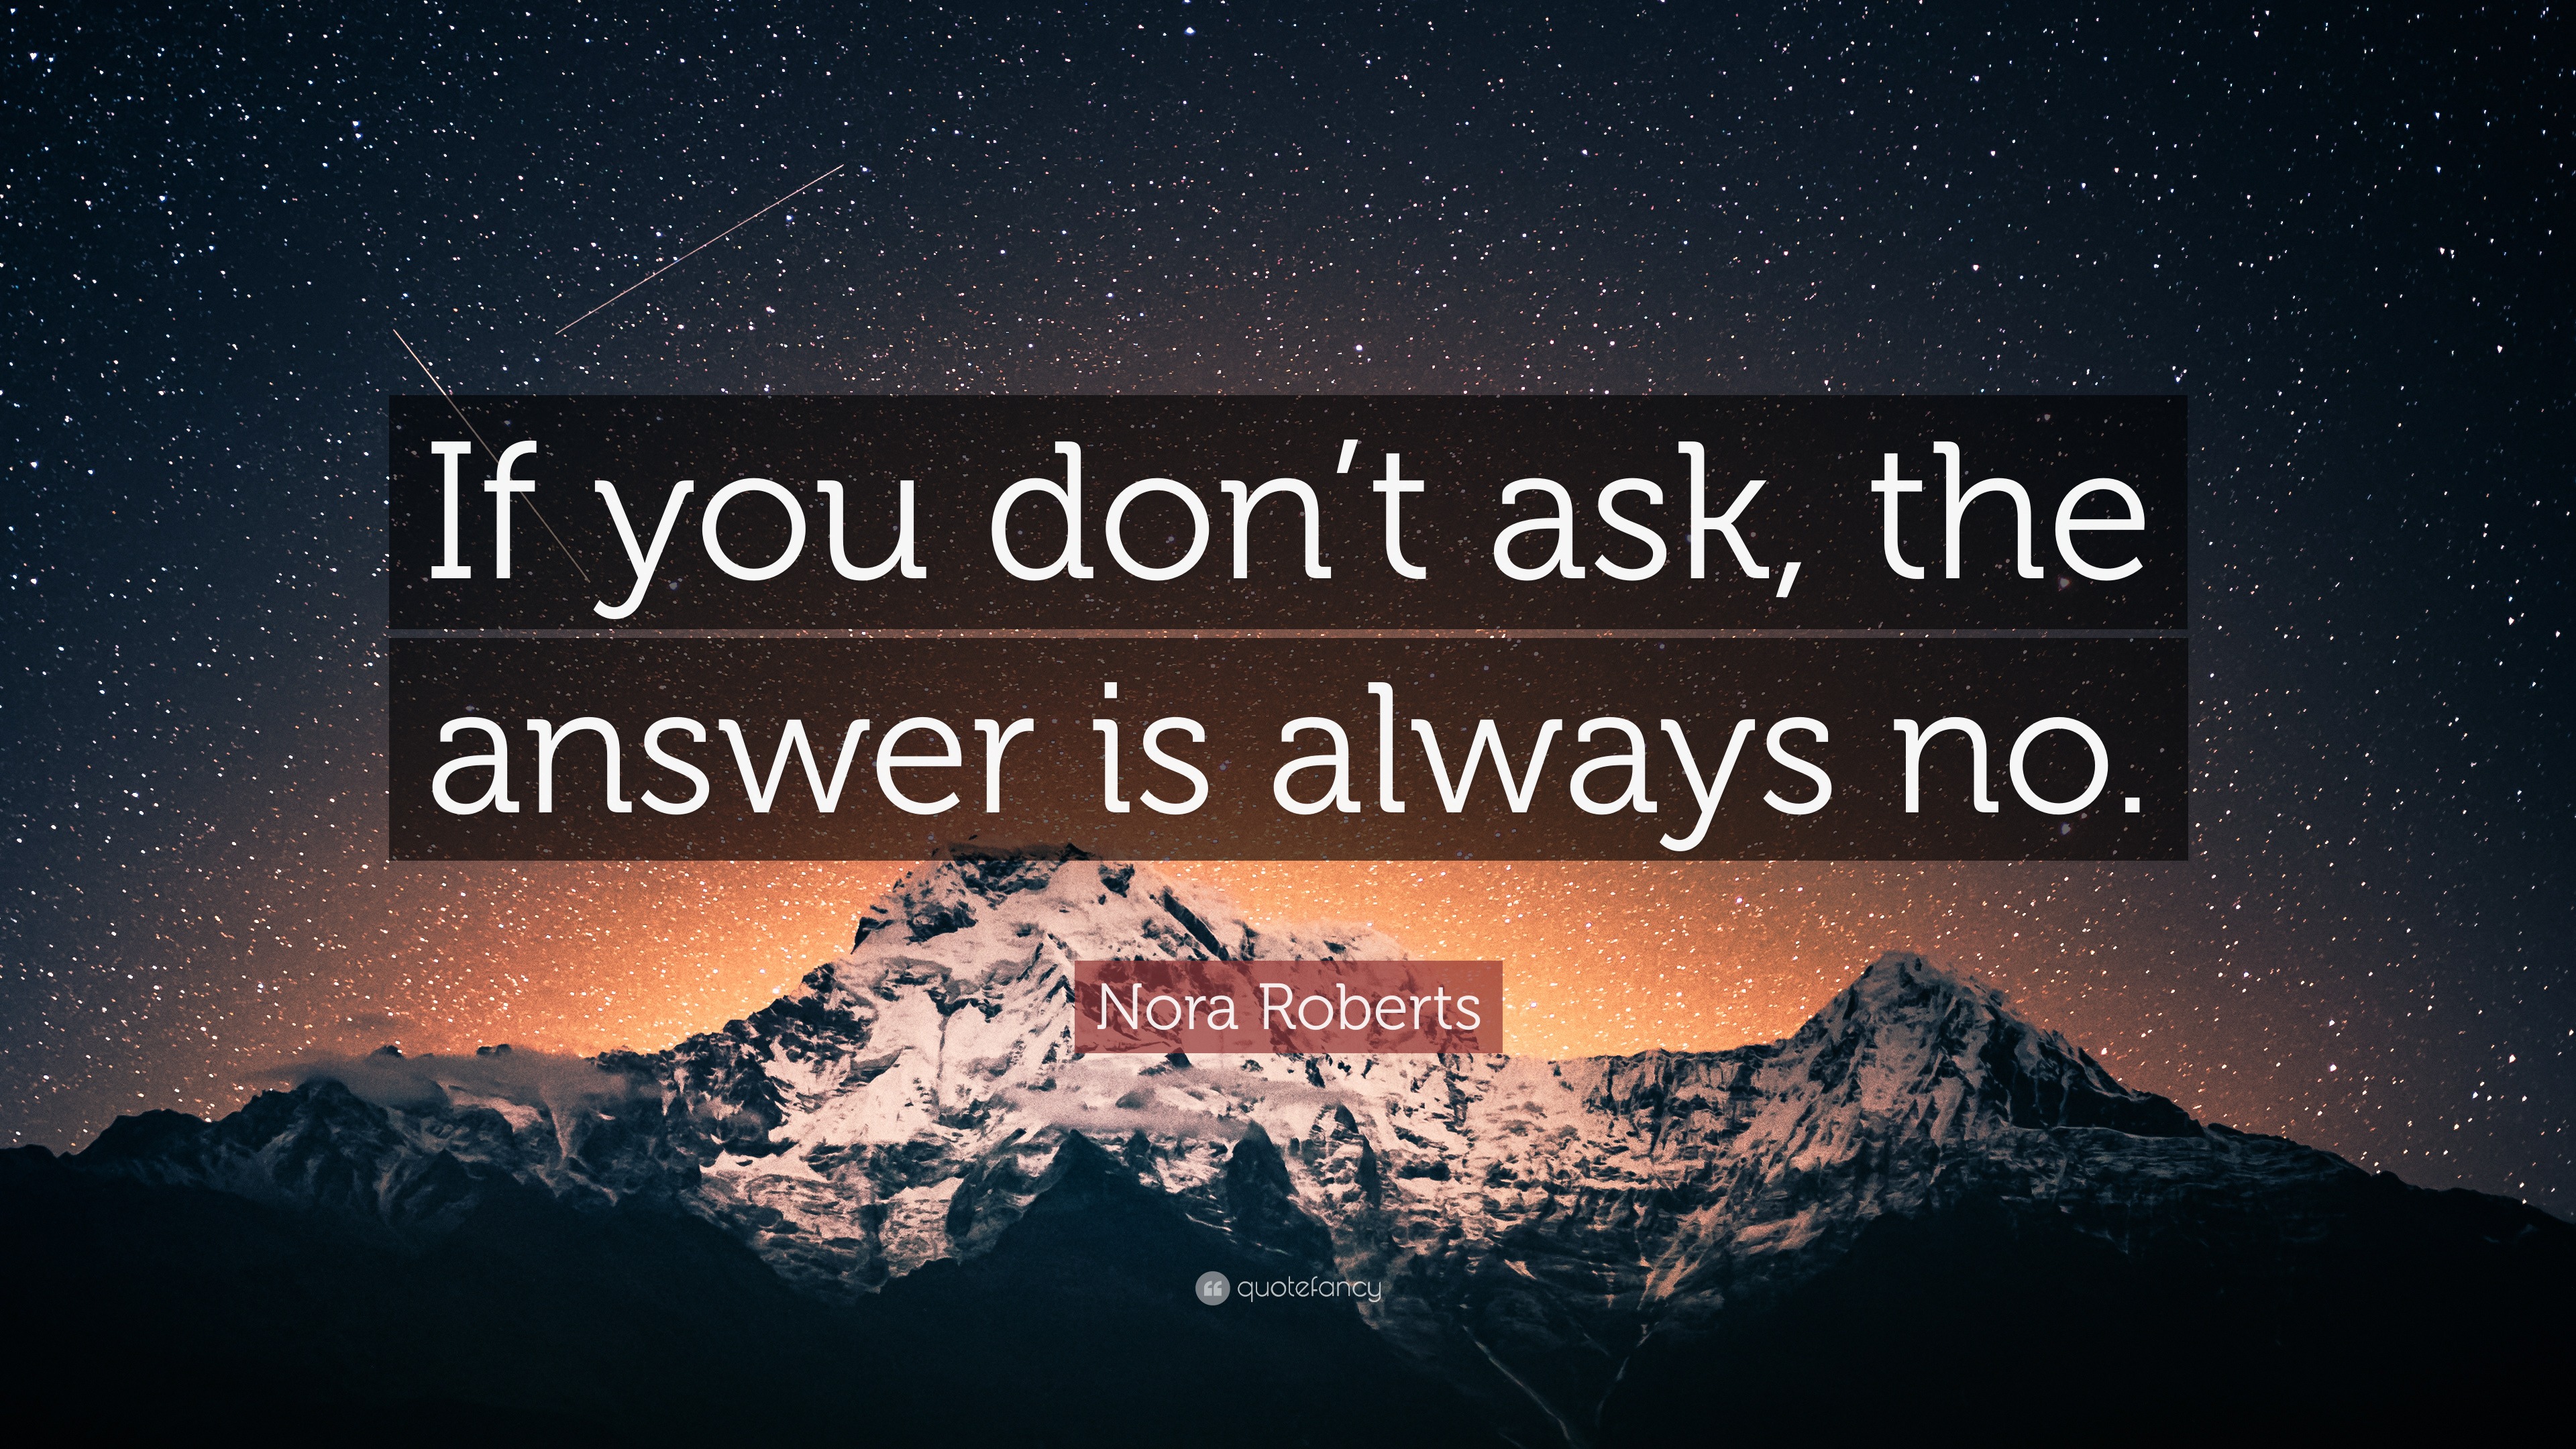 Nora Roberts Quote: “If you don’t ask, the answer is always no.” (33